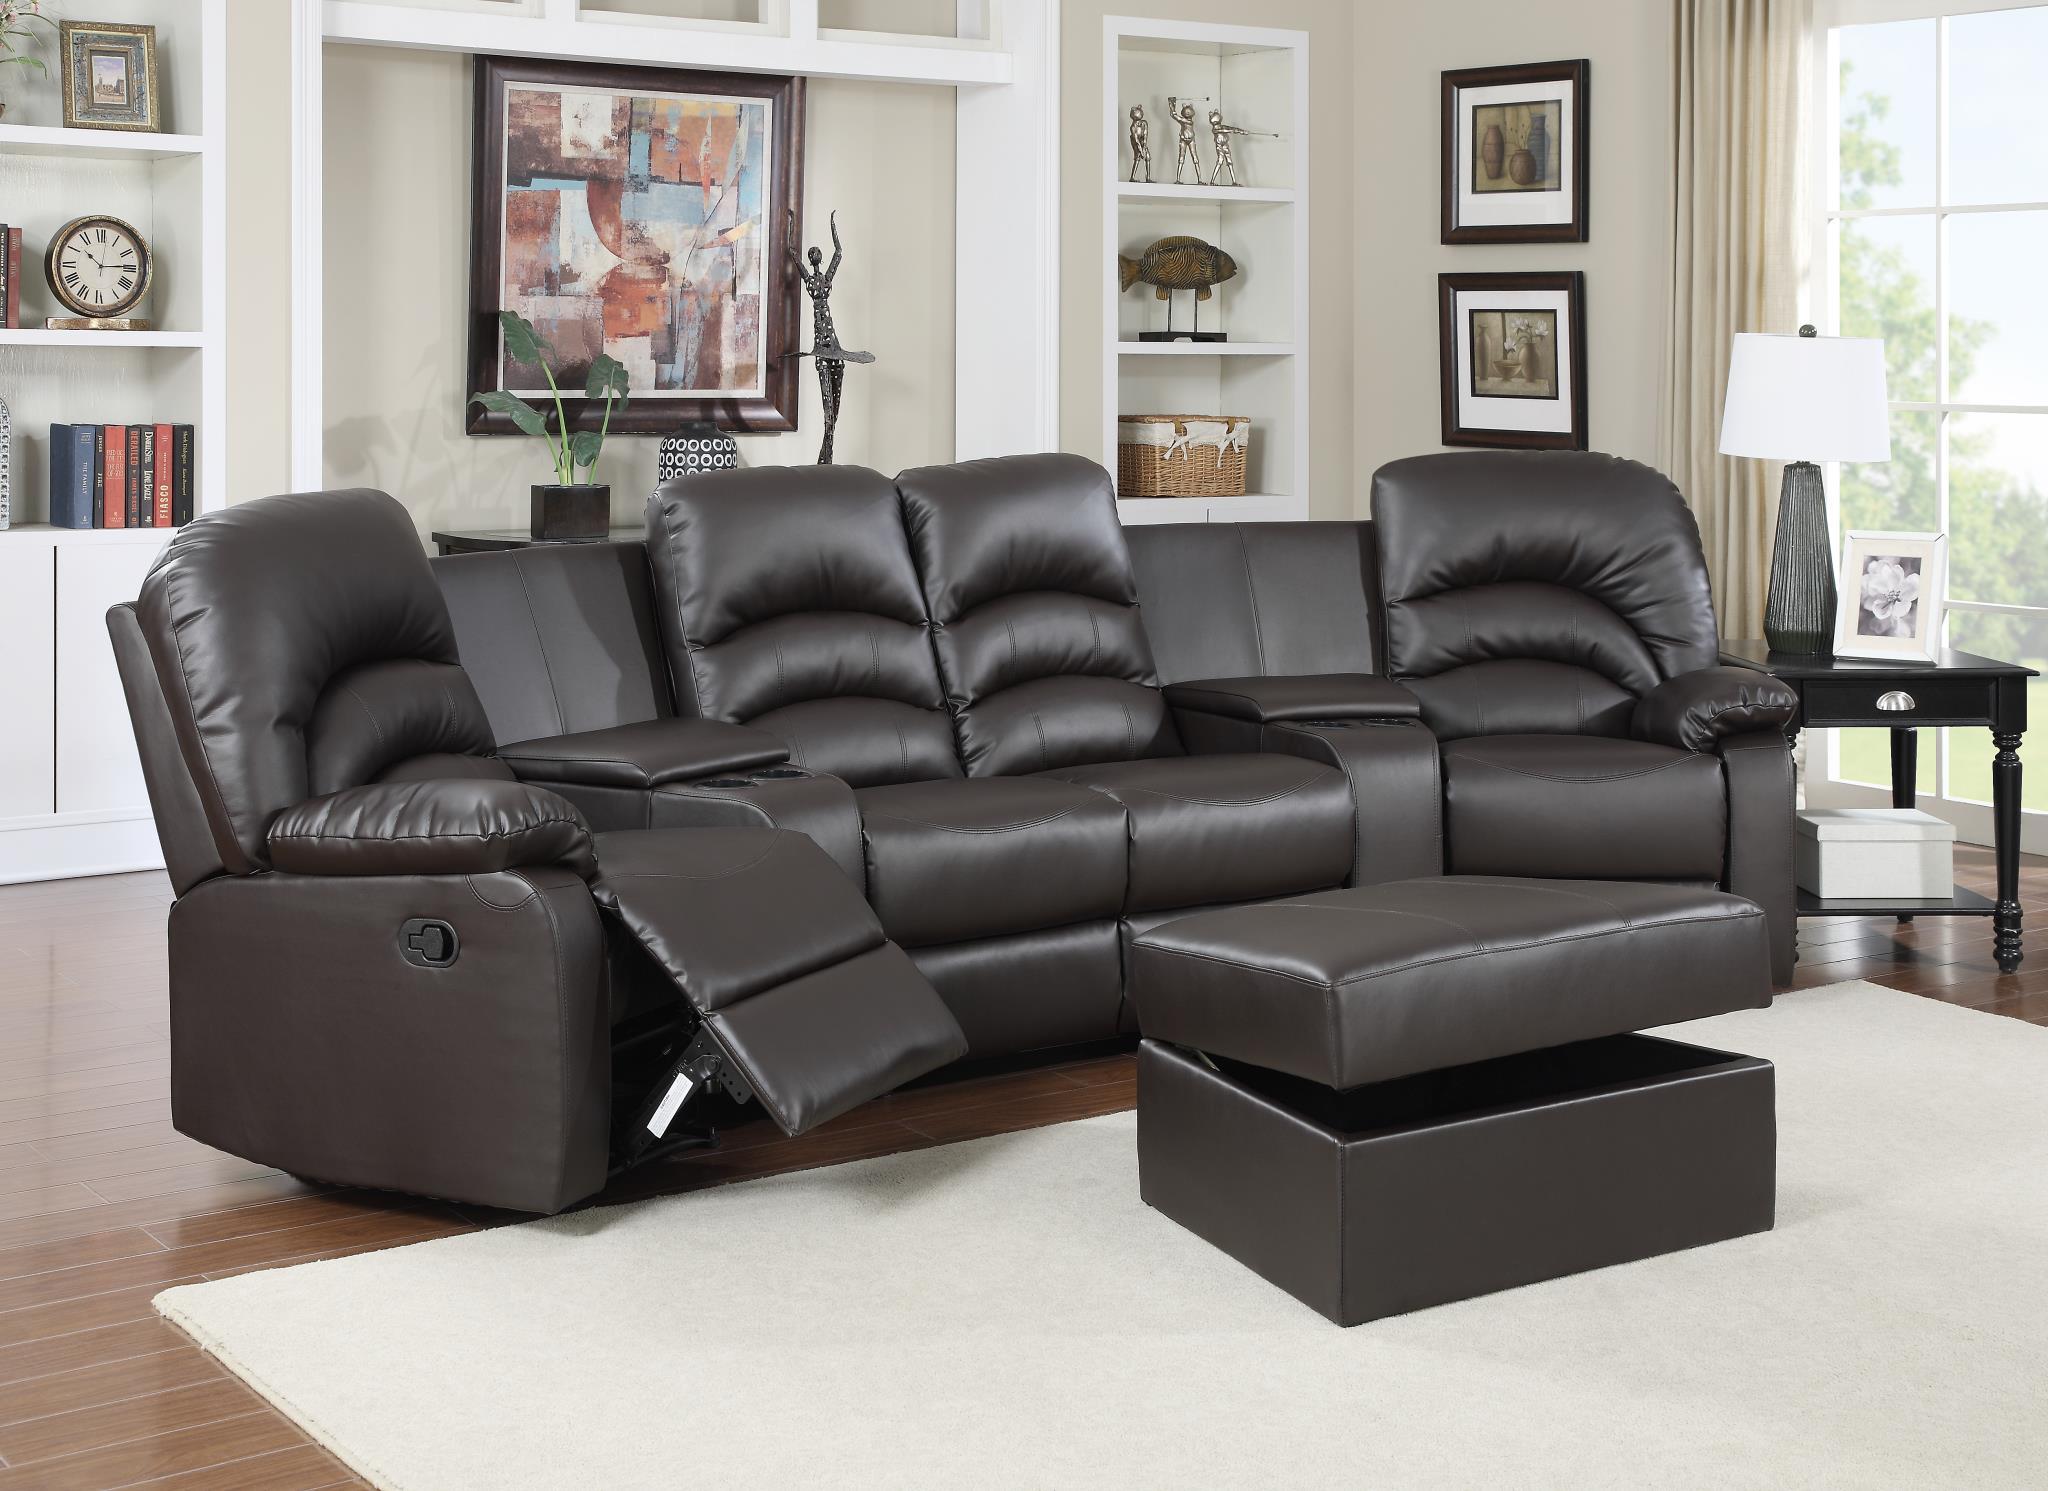 

    
Ventura Reclining Brown Leather Sectional w/Ottoman Home Theater Seats
